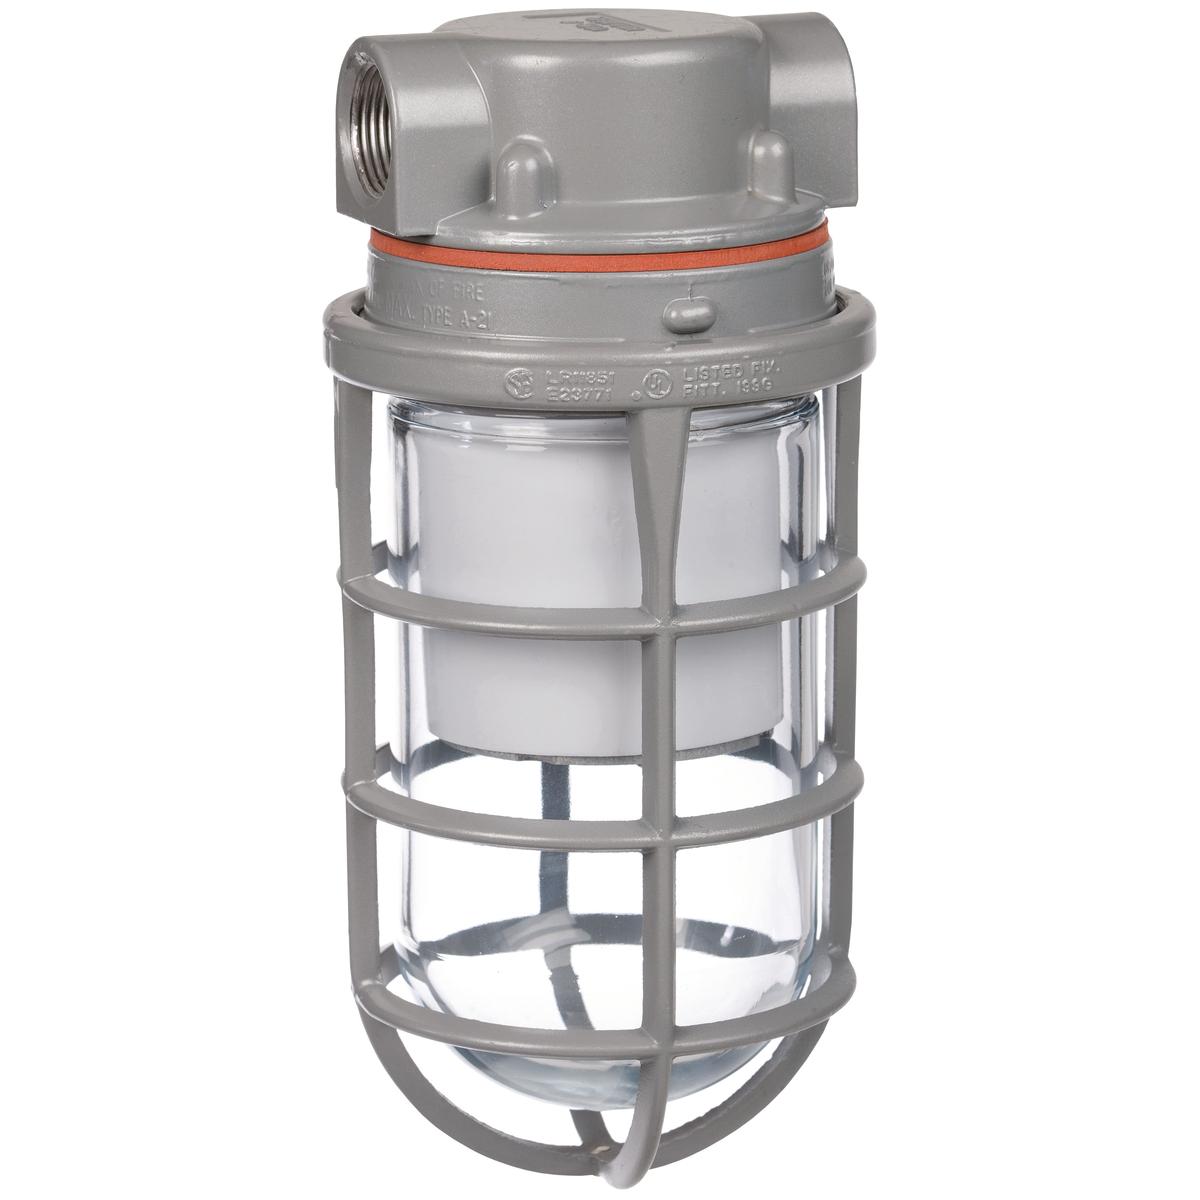 Hubbell VSL1630C1HG The VSL Series is a Vapor Tight/ Utility fixture using energy efficient LED's. This fixture is made with a cast copper-free aluminum housing and mount that is  suitable for harsh and hazardous environments. With the design of this fixtures internal heat s